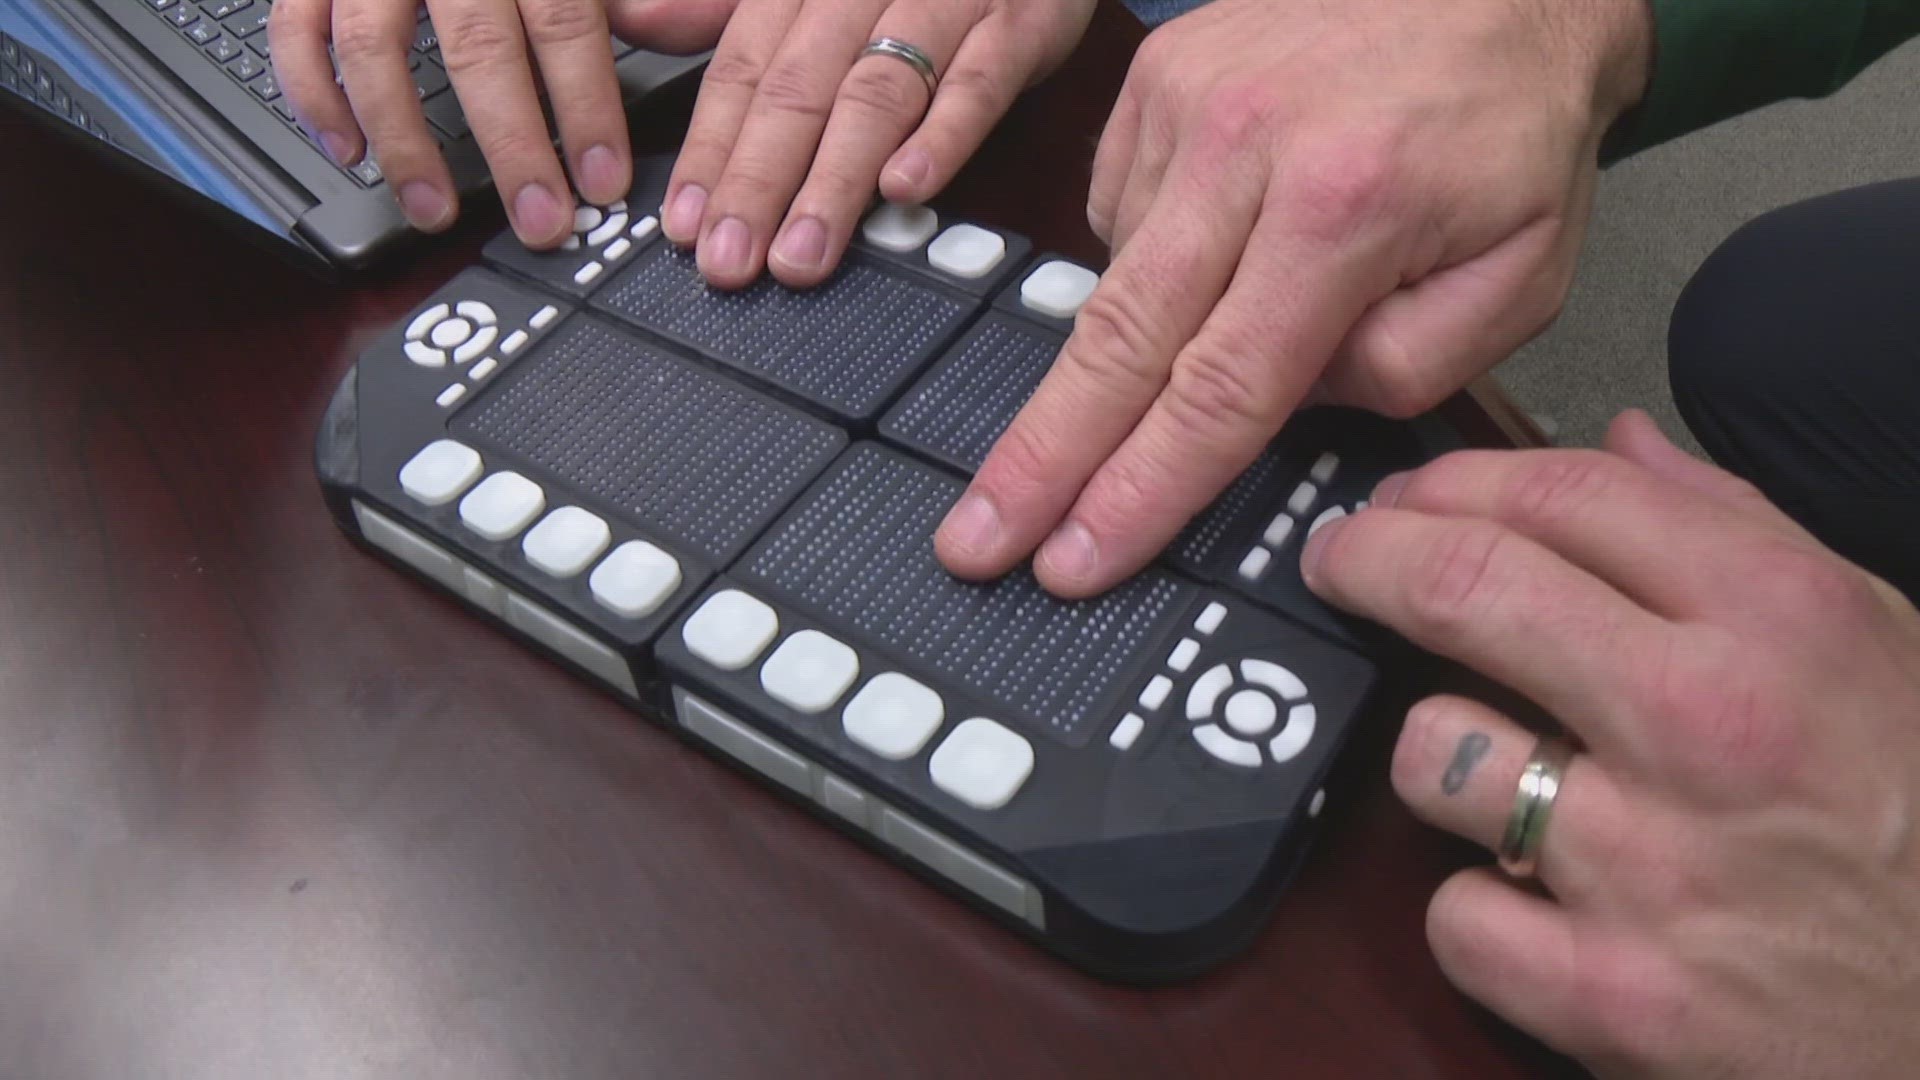 13News reporter and anchor Dustin Grove talks with Wunji Lau and his co-founder at Tactile Engineering on their new invention helping the blind see the eclipse.